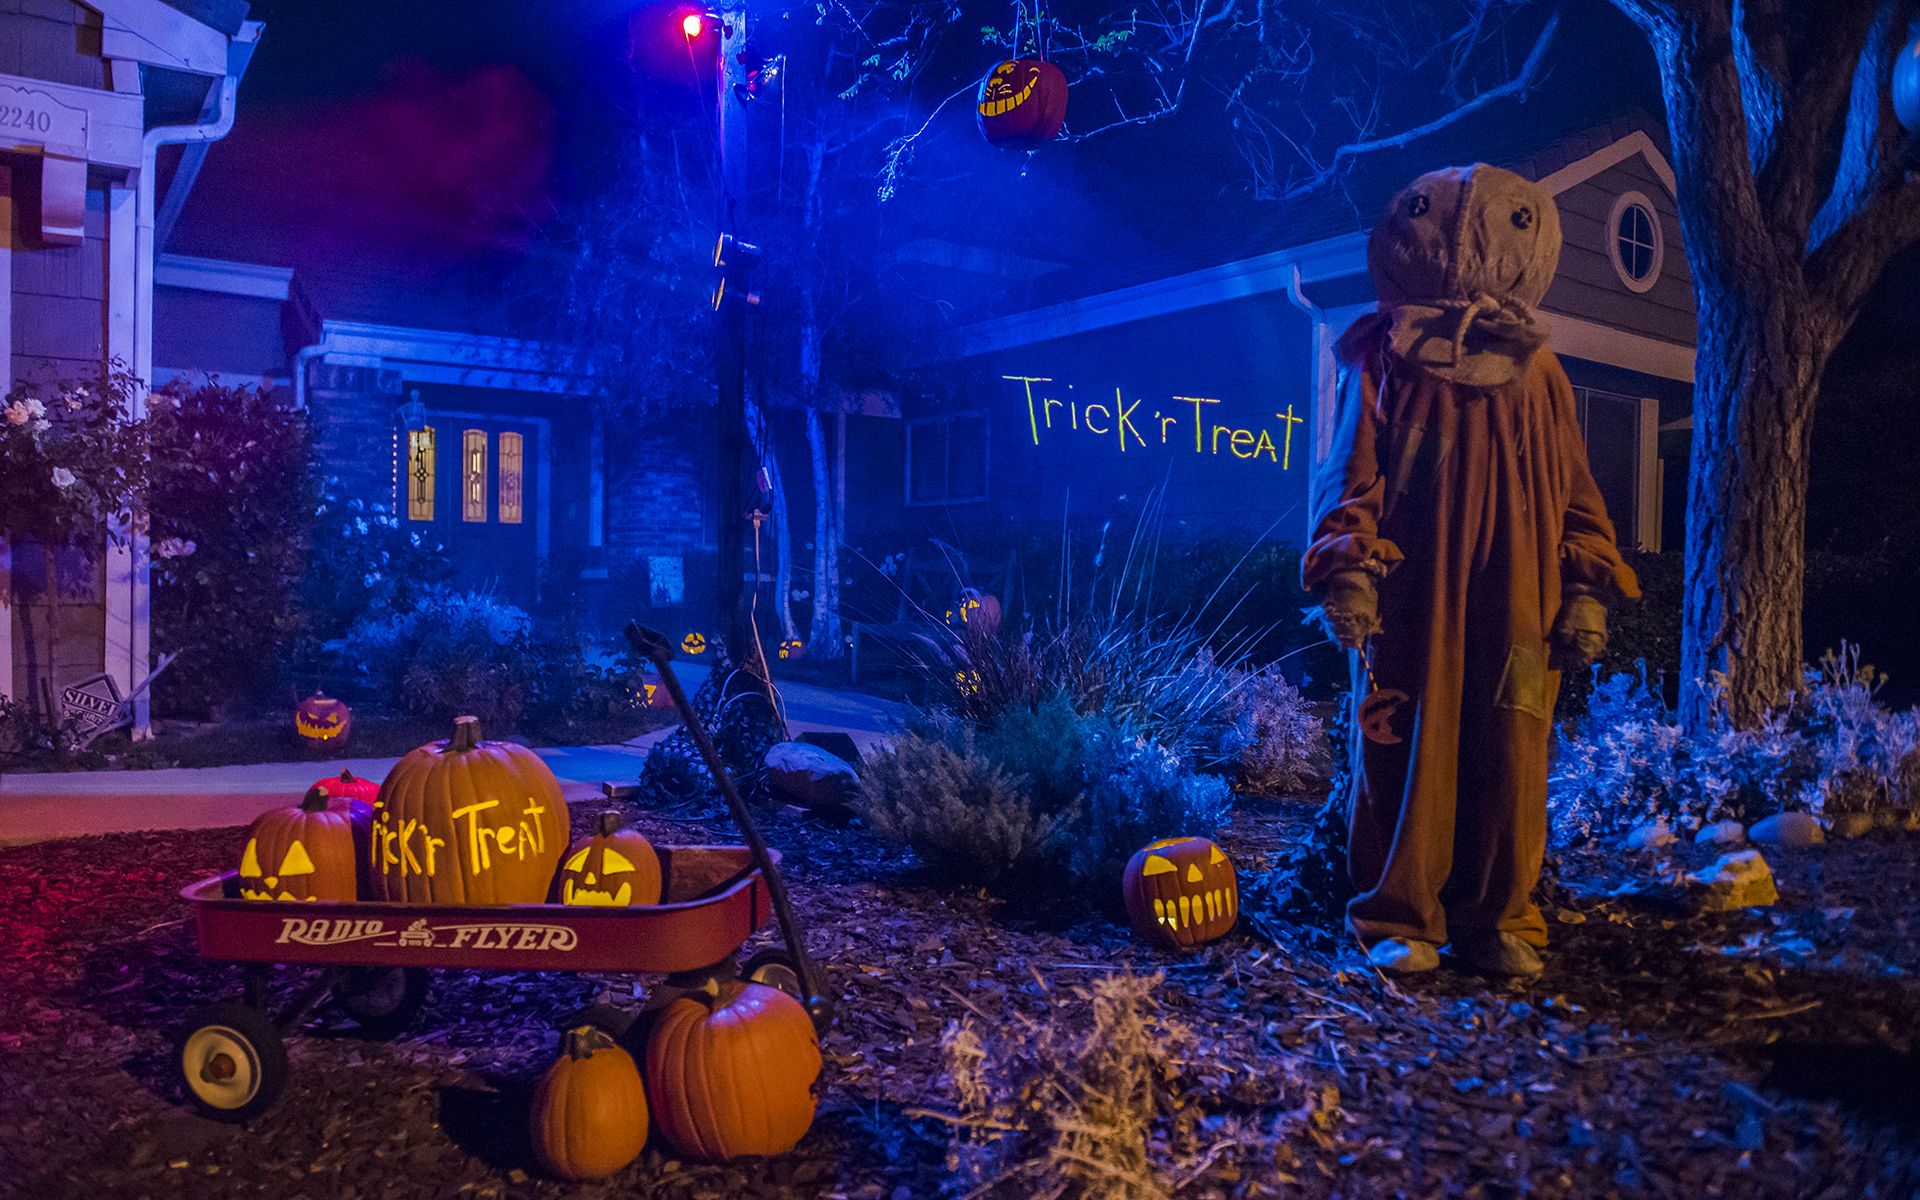 Murder House Productions presents Trick 'R Treat: 2017 Review